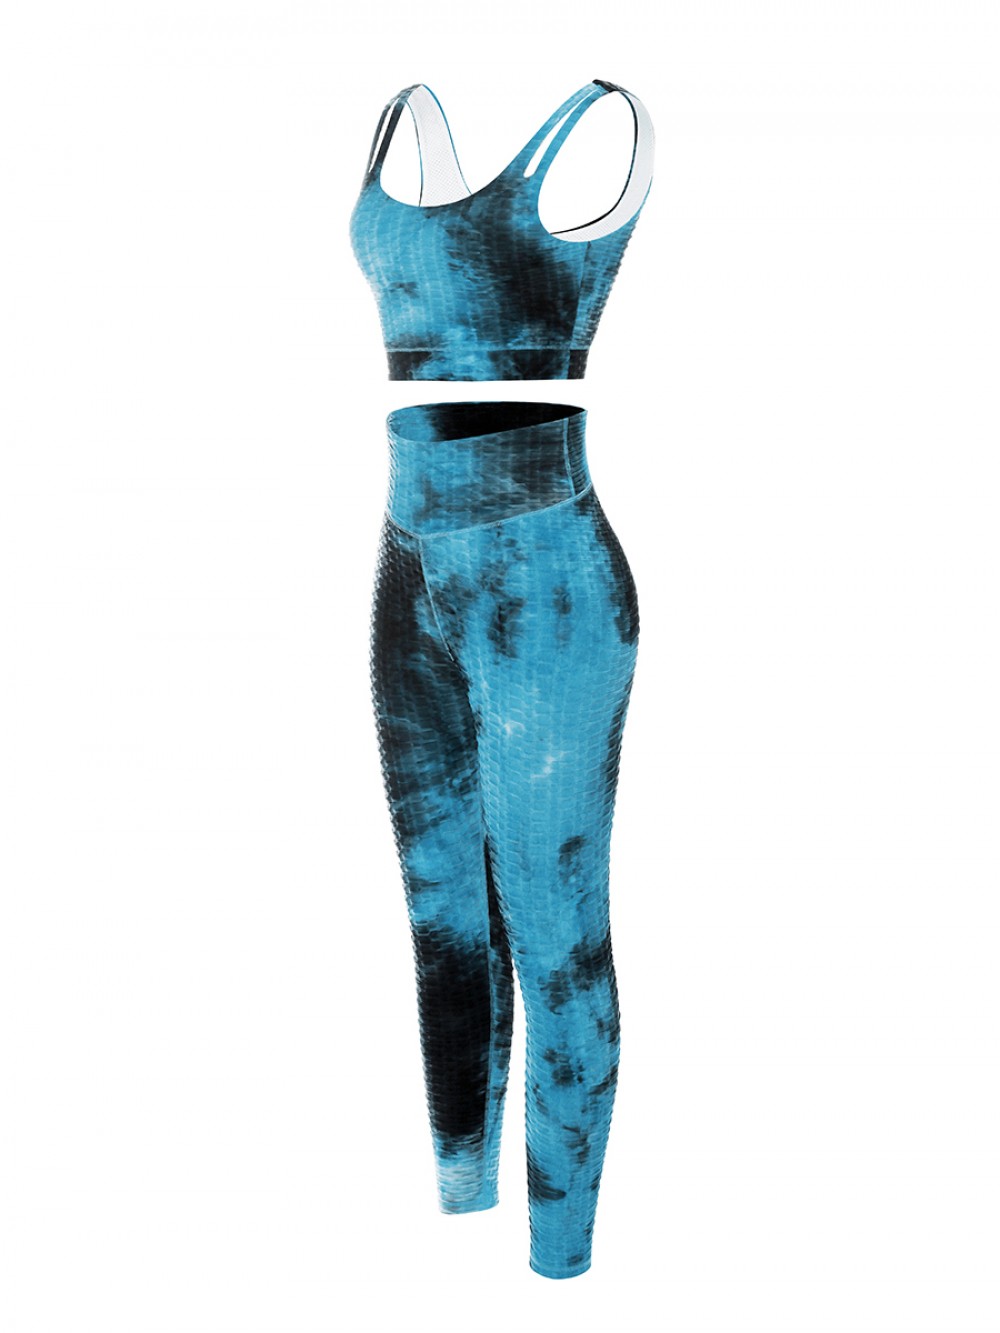 Blue High Waist Tie-Dyed Print Yogawear Suit Workout Activewear